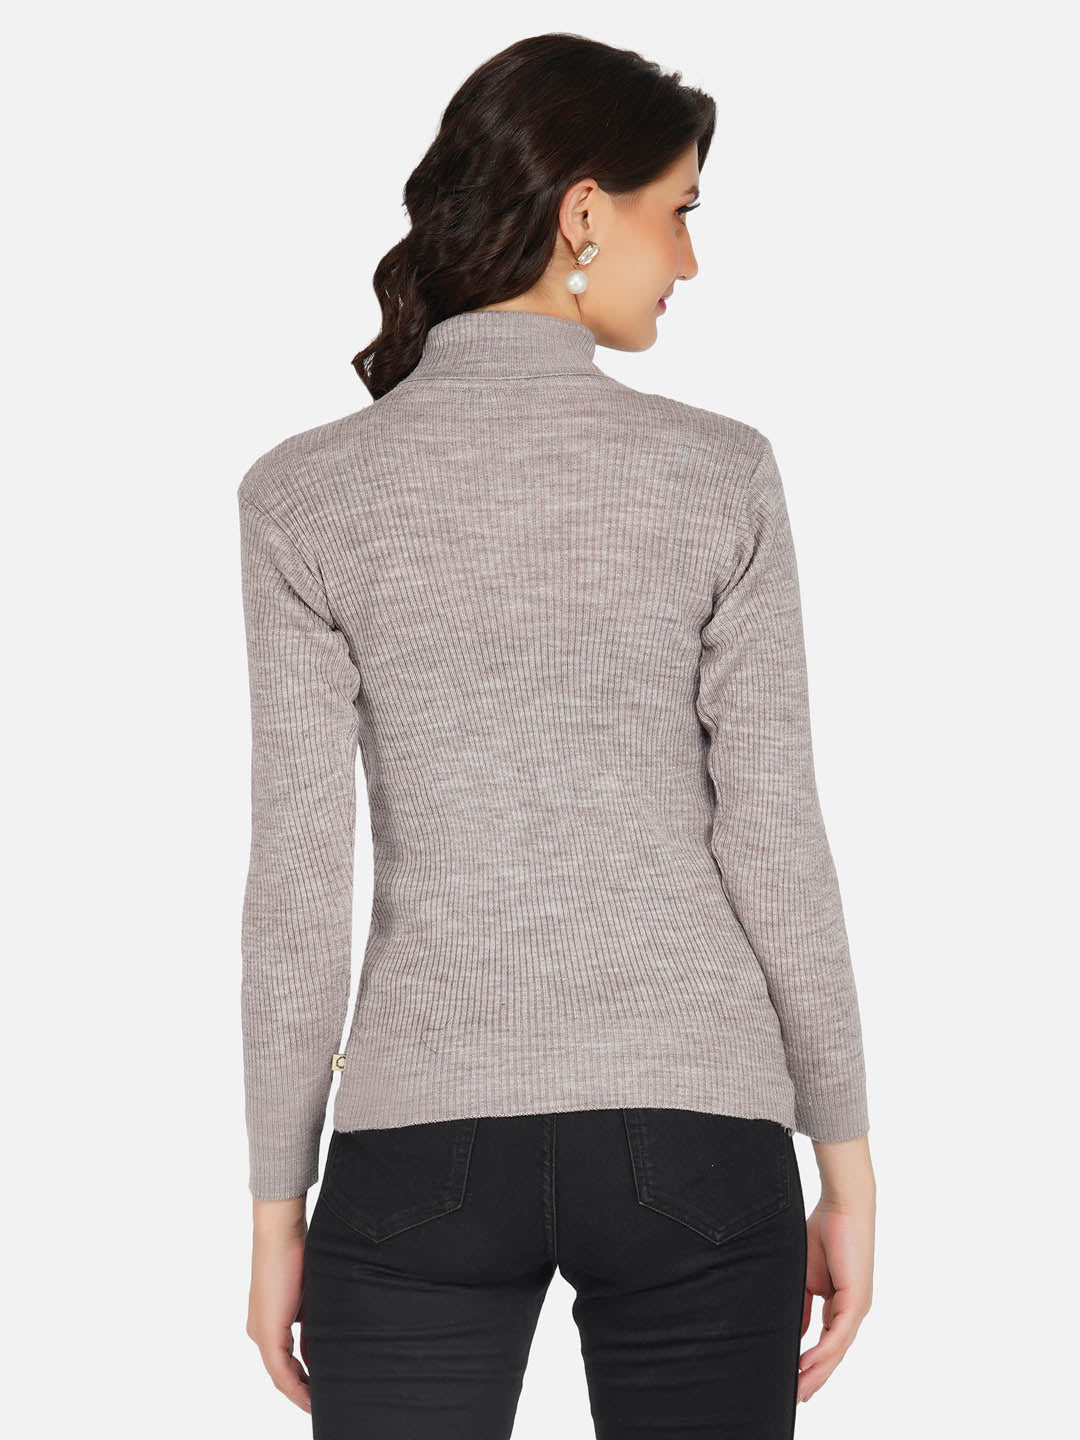 Grey Cable Design High Neck Knitted Sweater